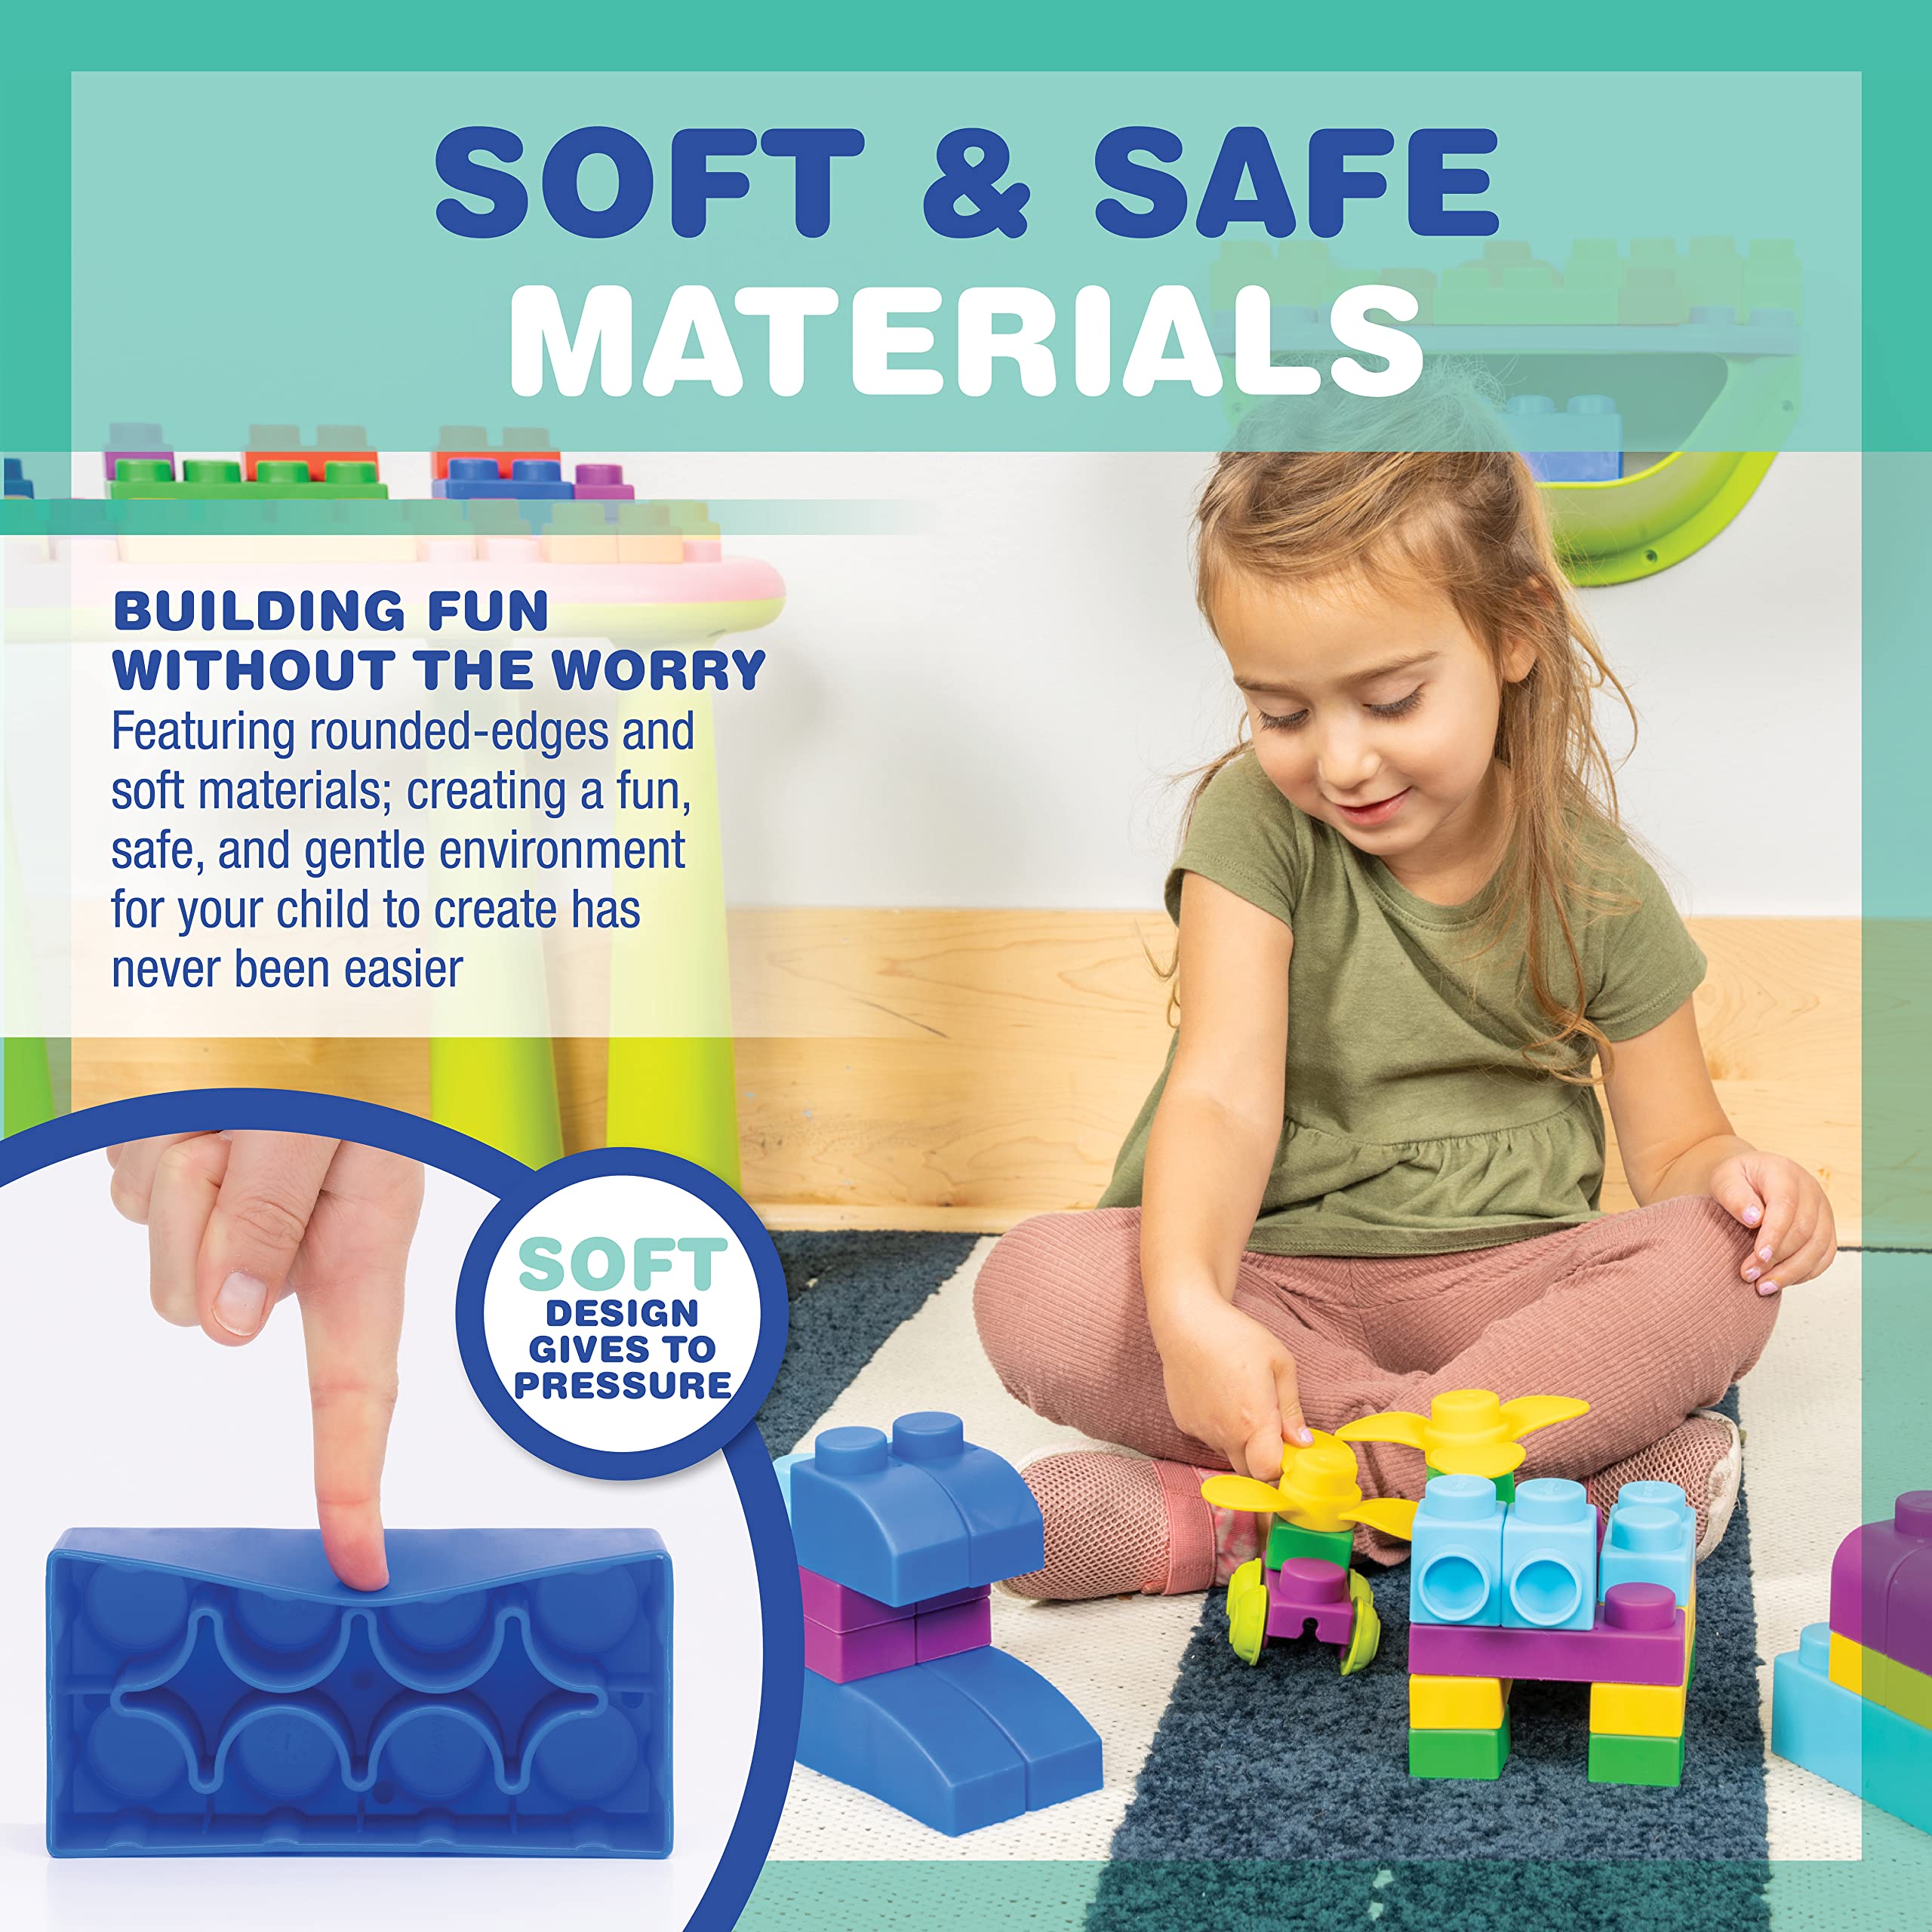 UNiPLAY Plus Soft Building Blocks — Creativity Toy, Educational Play, Cognitive Development, Early Learning Stacking Blocks for Infants and Toddlers, Primary (42-Piece Set)